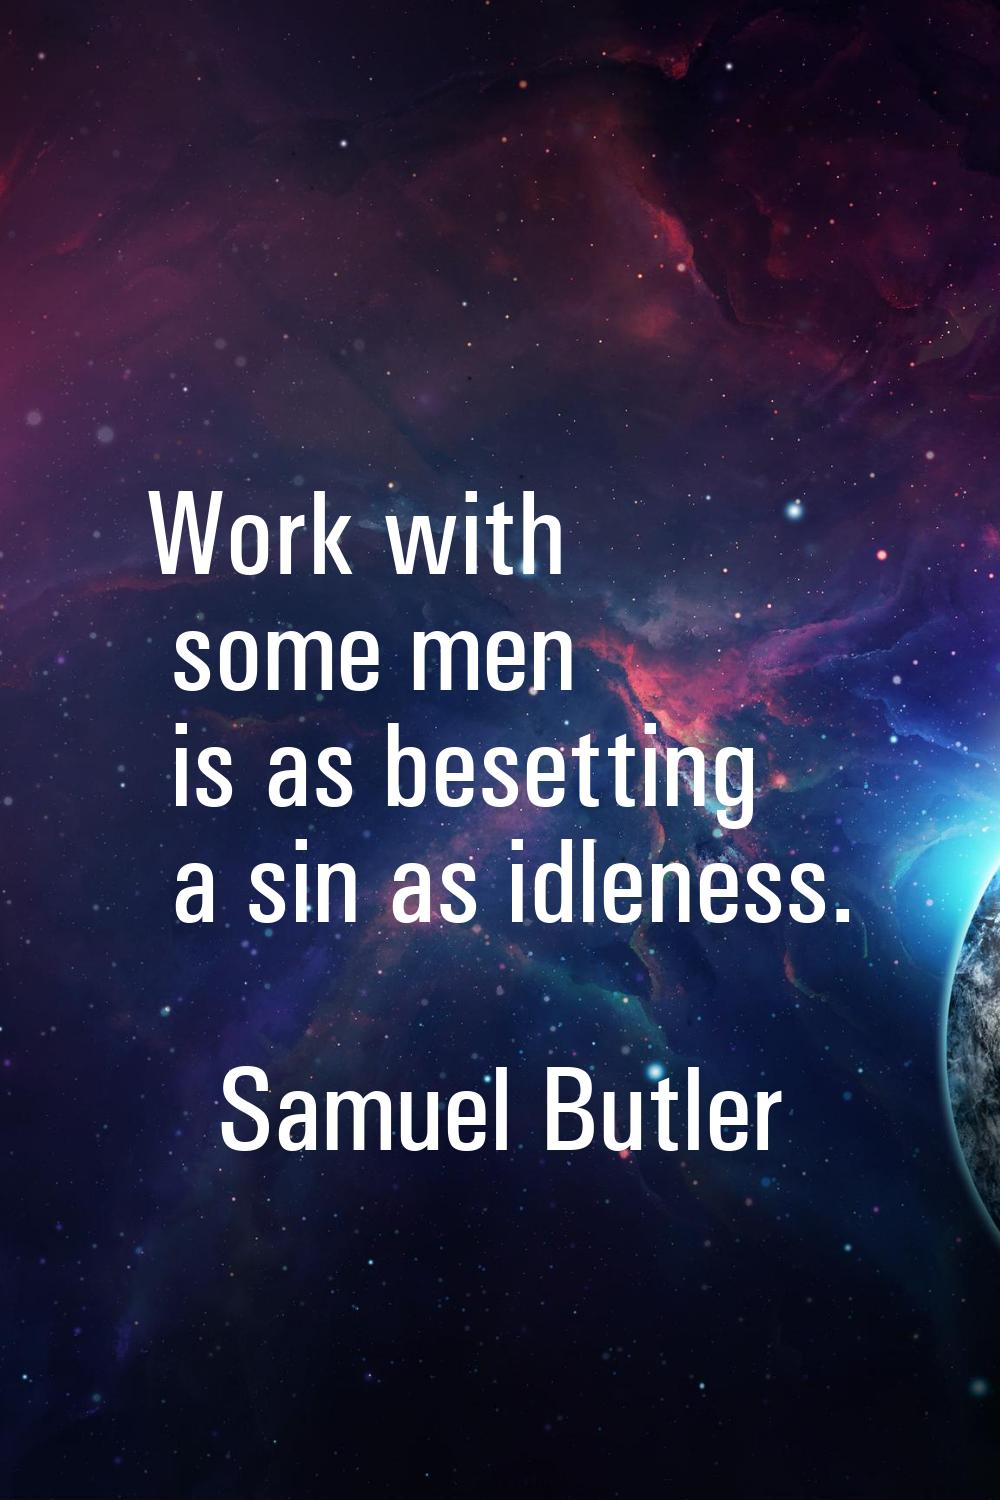 Work with some men is as besetting a sin as idleness.